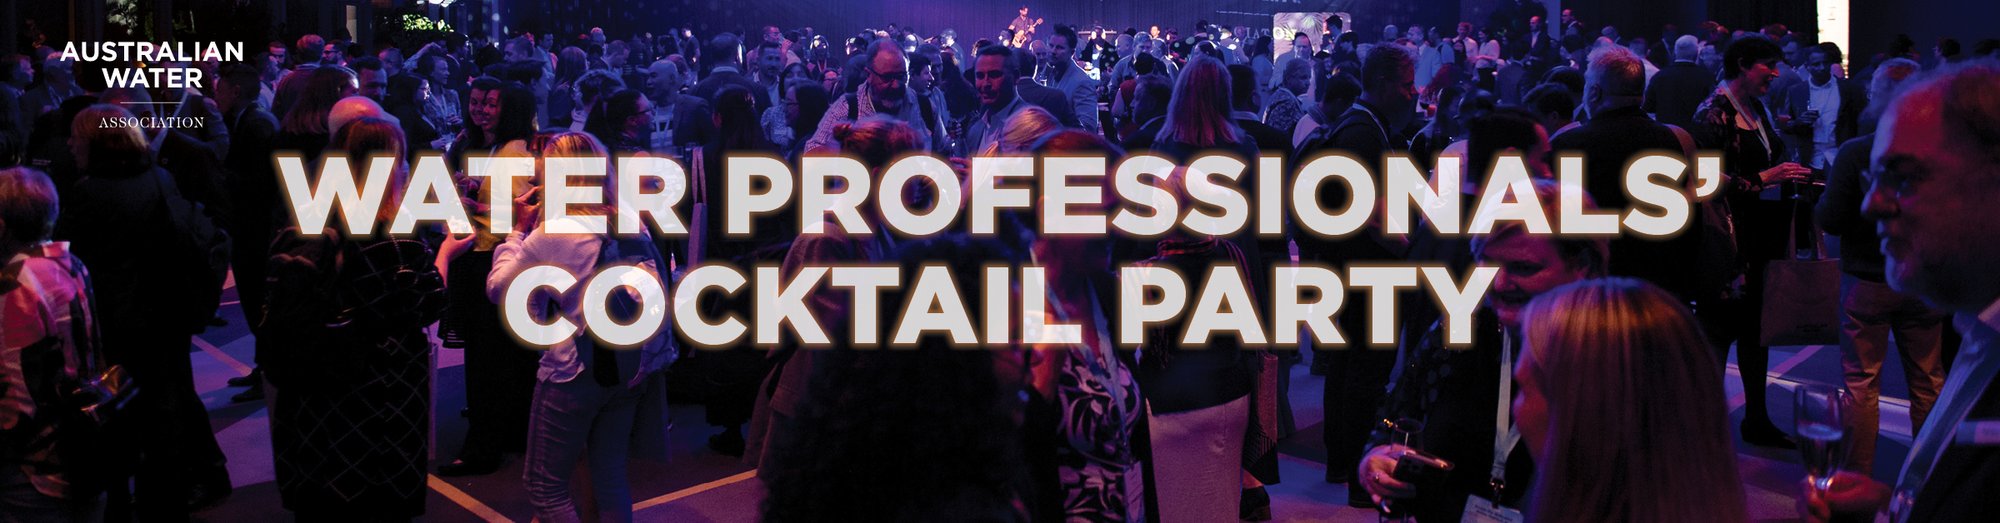 Water Professional Cocktail Party_HubSpot Event Banner 1200x314px